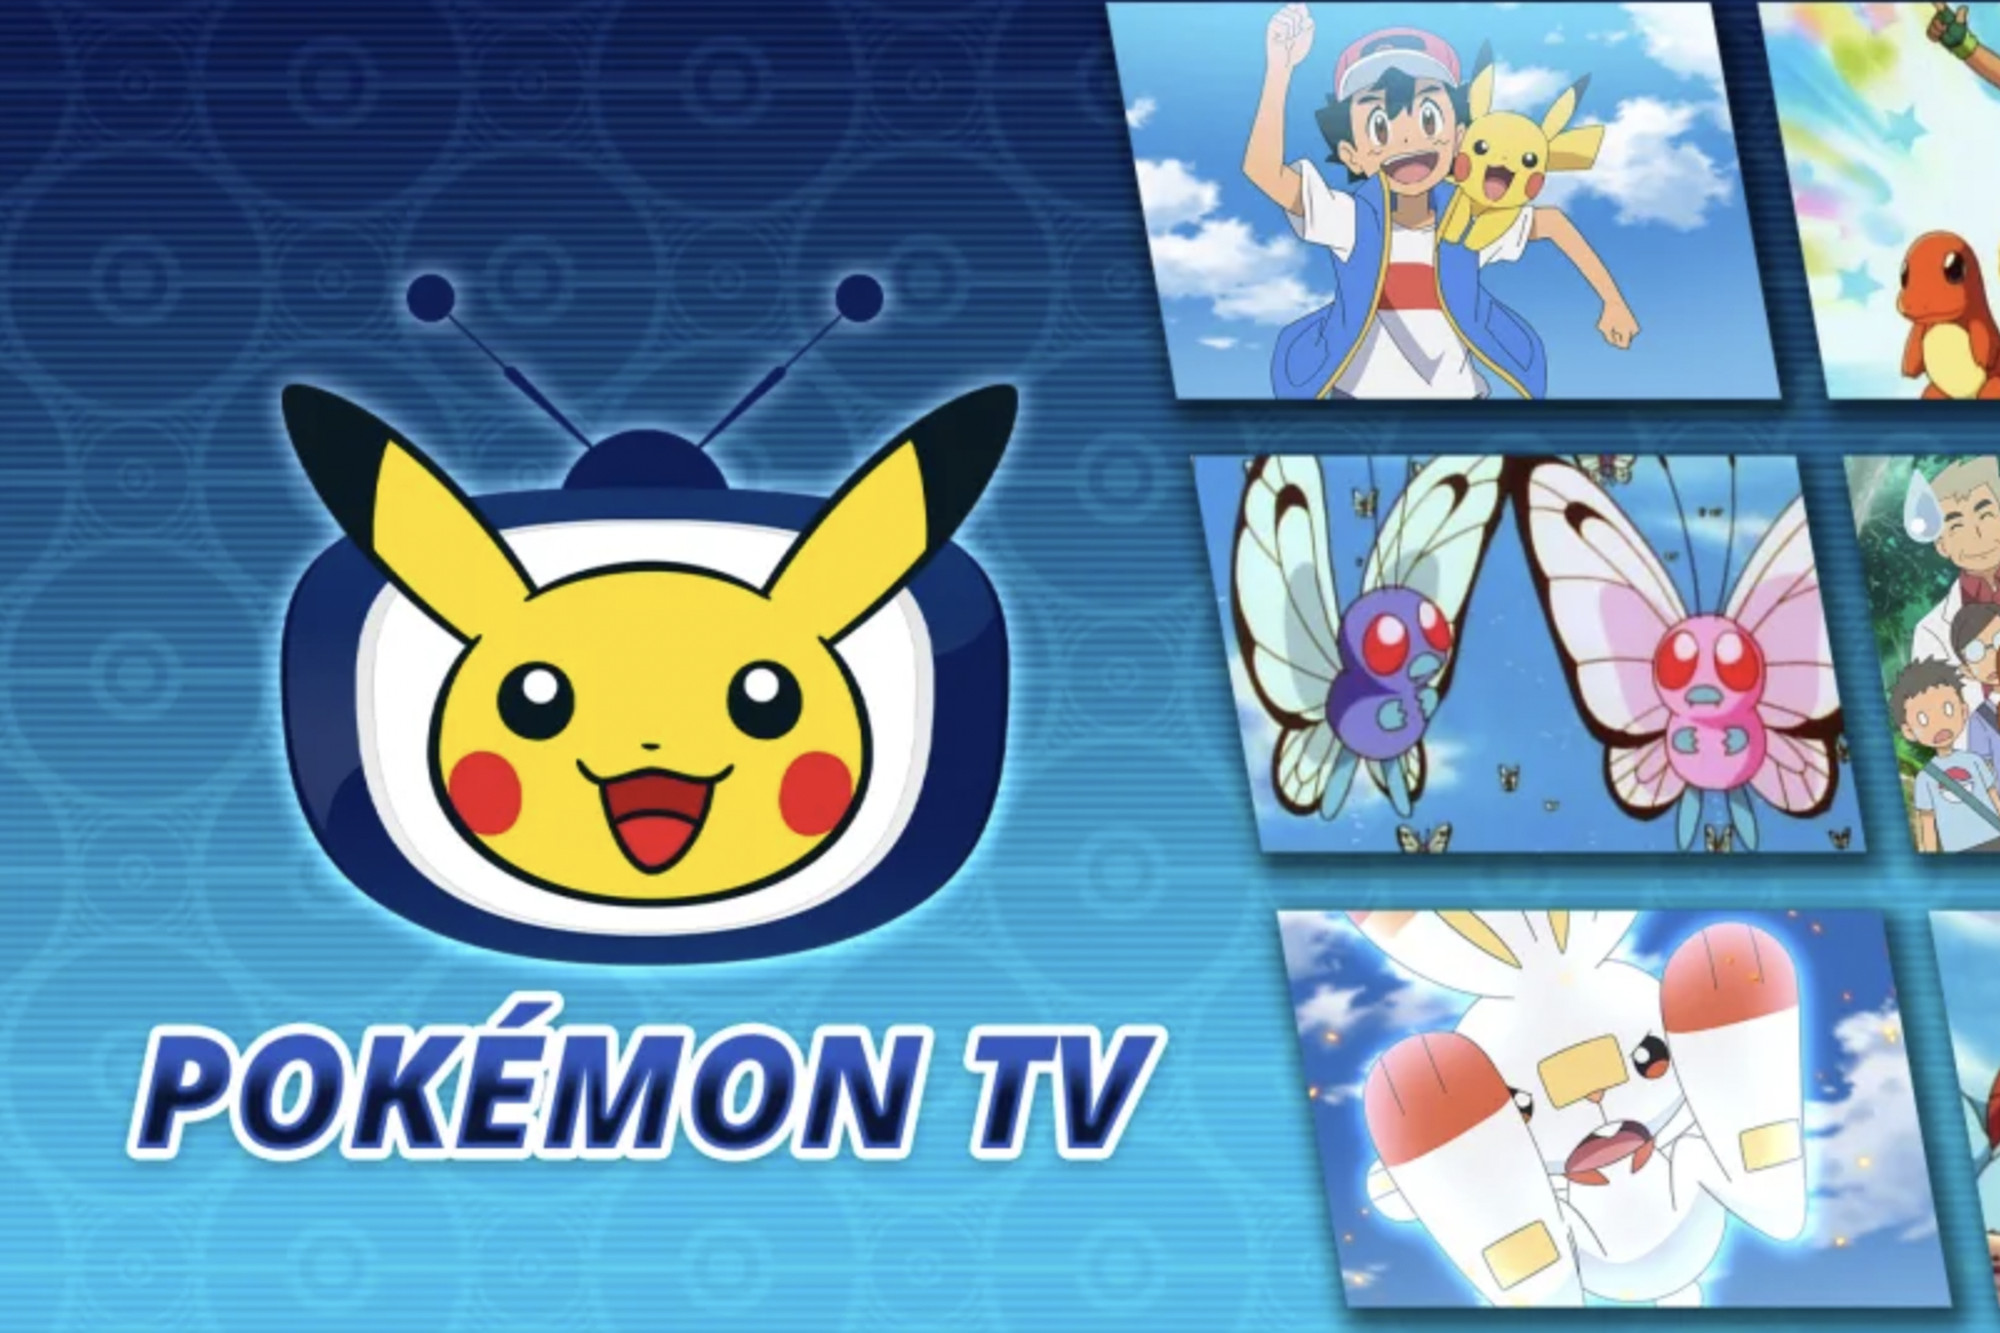 Pokémon TV app now available on Switch - The Verge